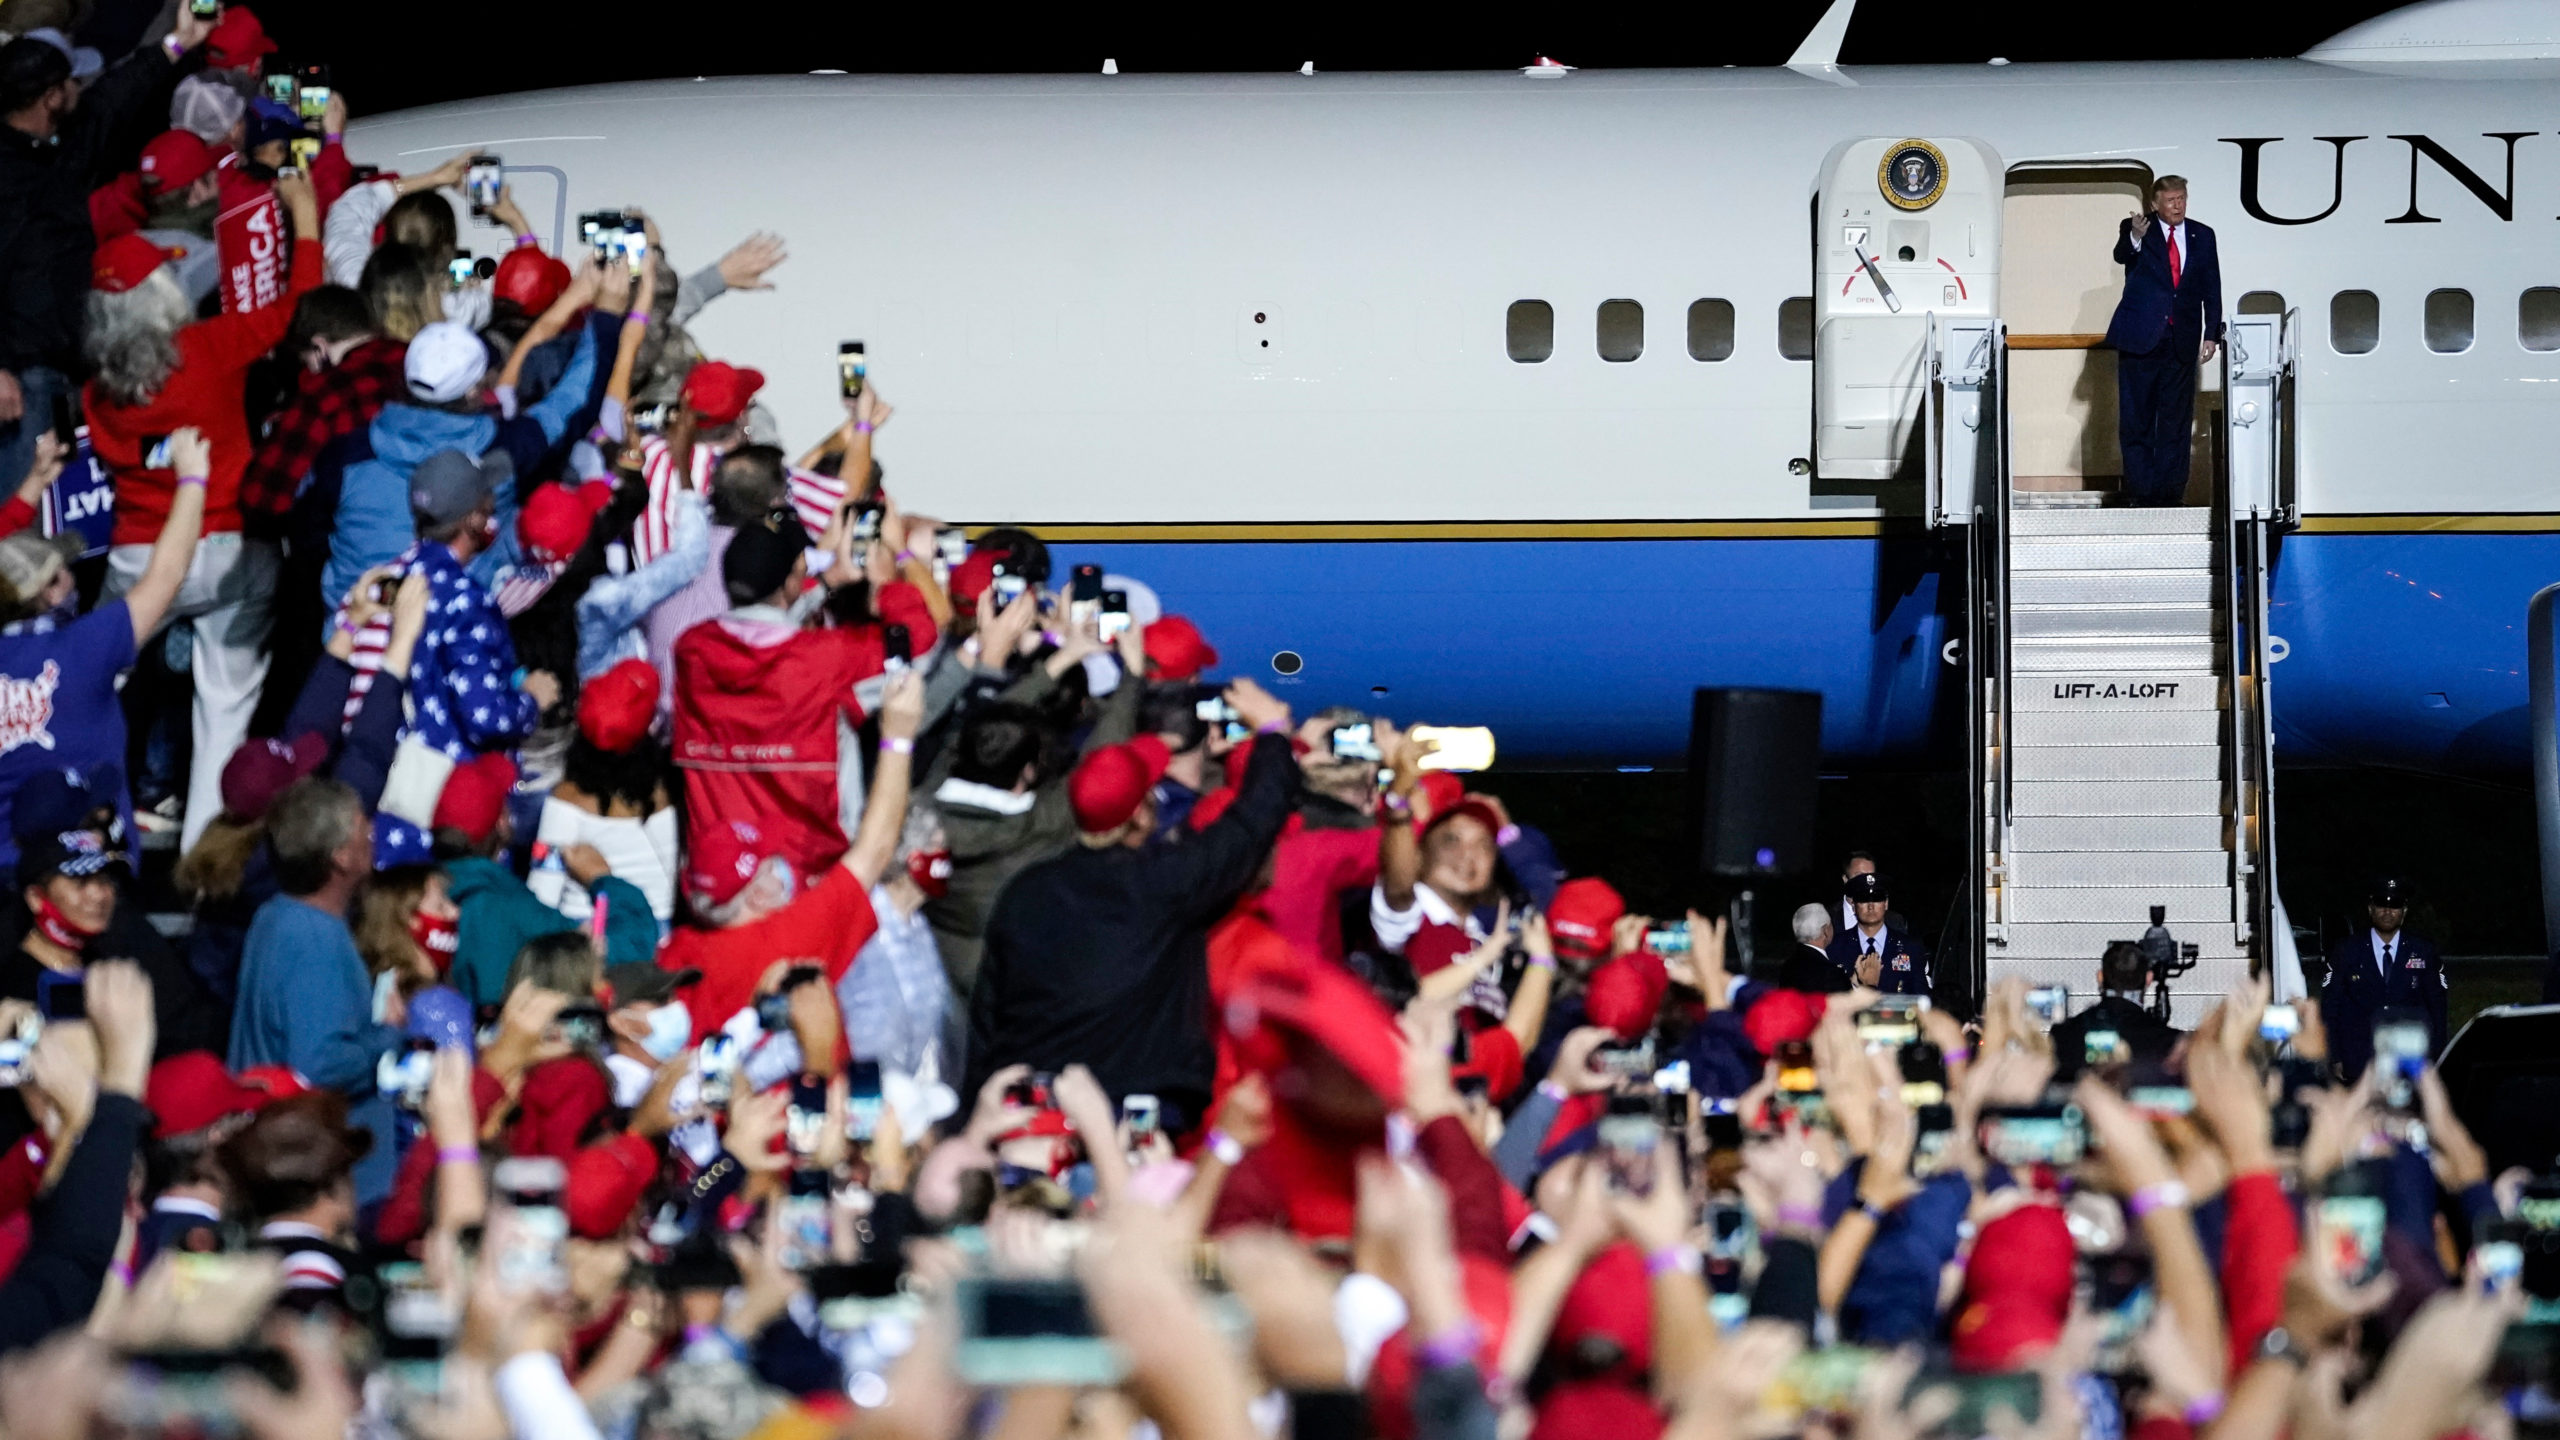 U.S. President Donald Trump arrives for a campaign rally at Newport News/Williamsburg International Airport on September 25, 2020 in Newport News, Virginia. (Photo: Drew Angerer, Getty Images)